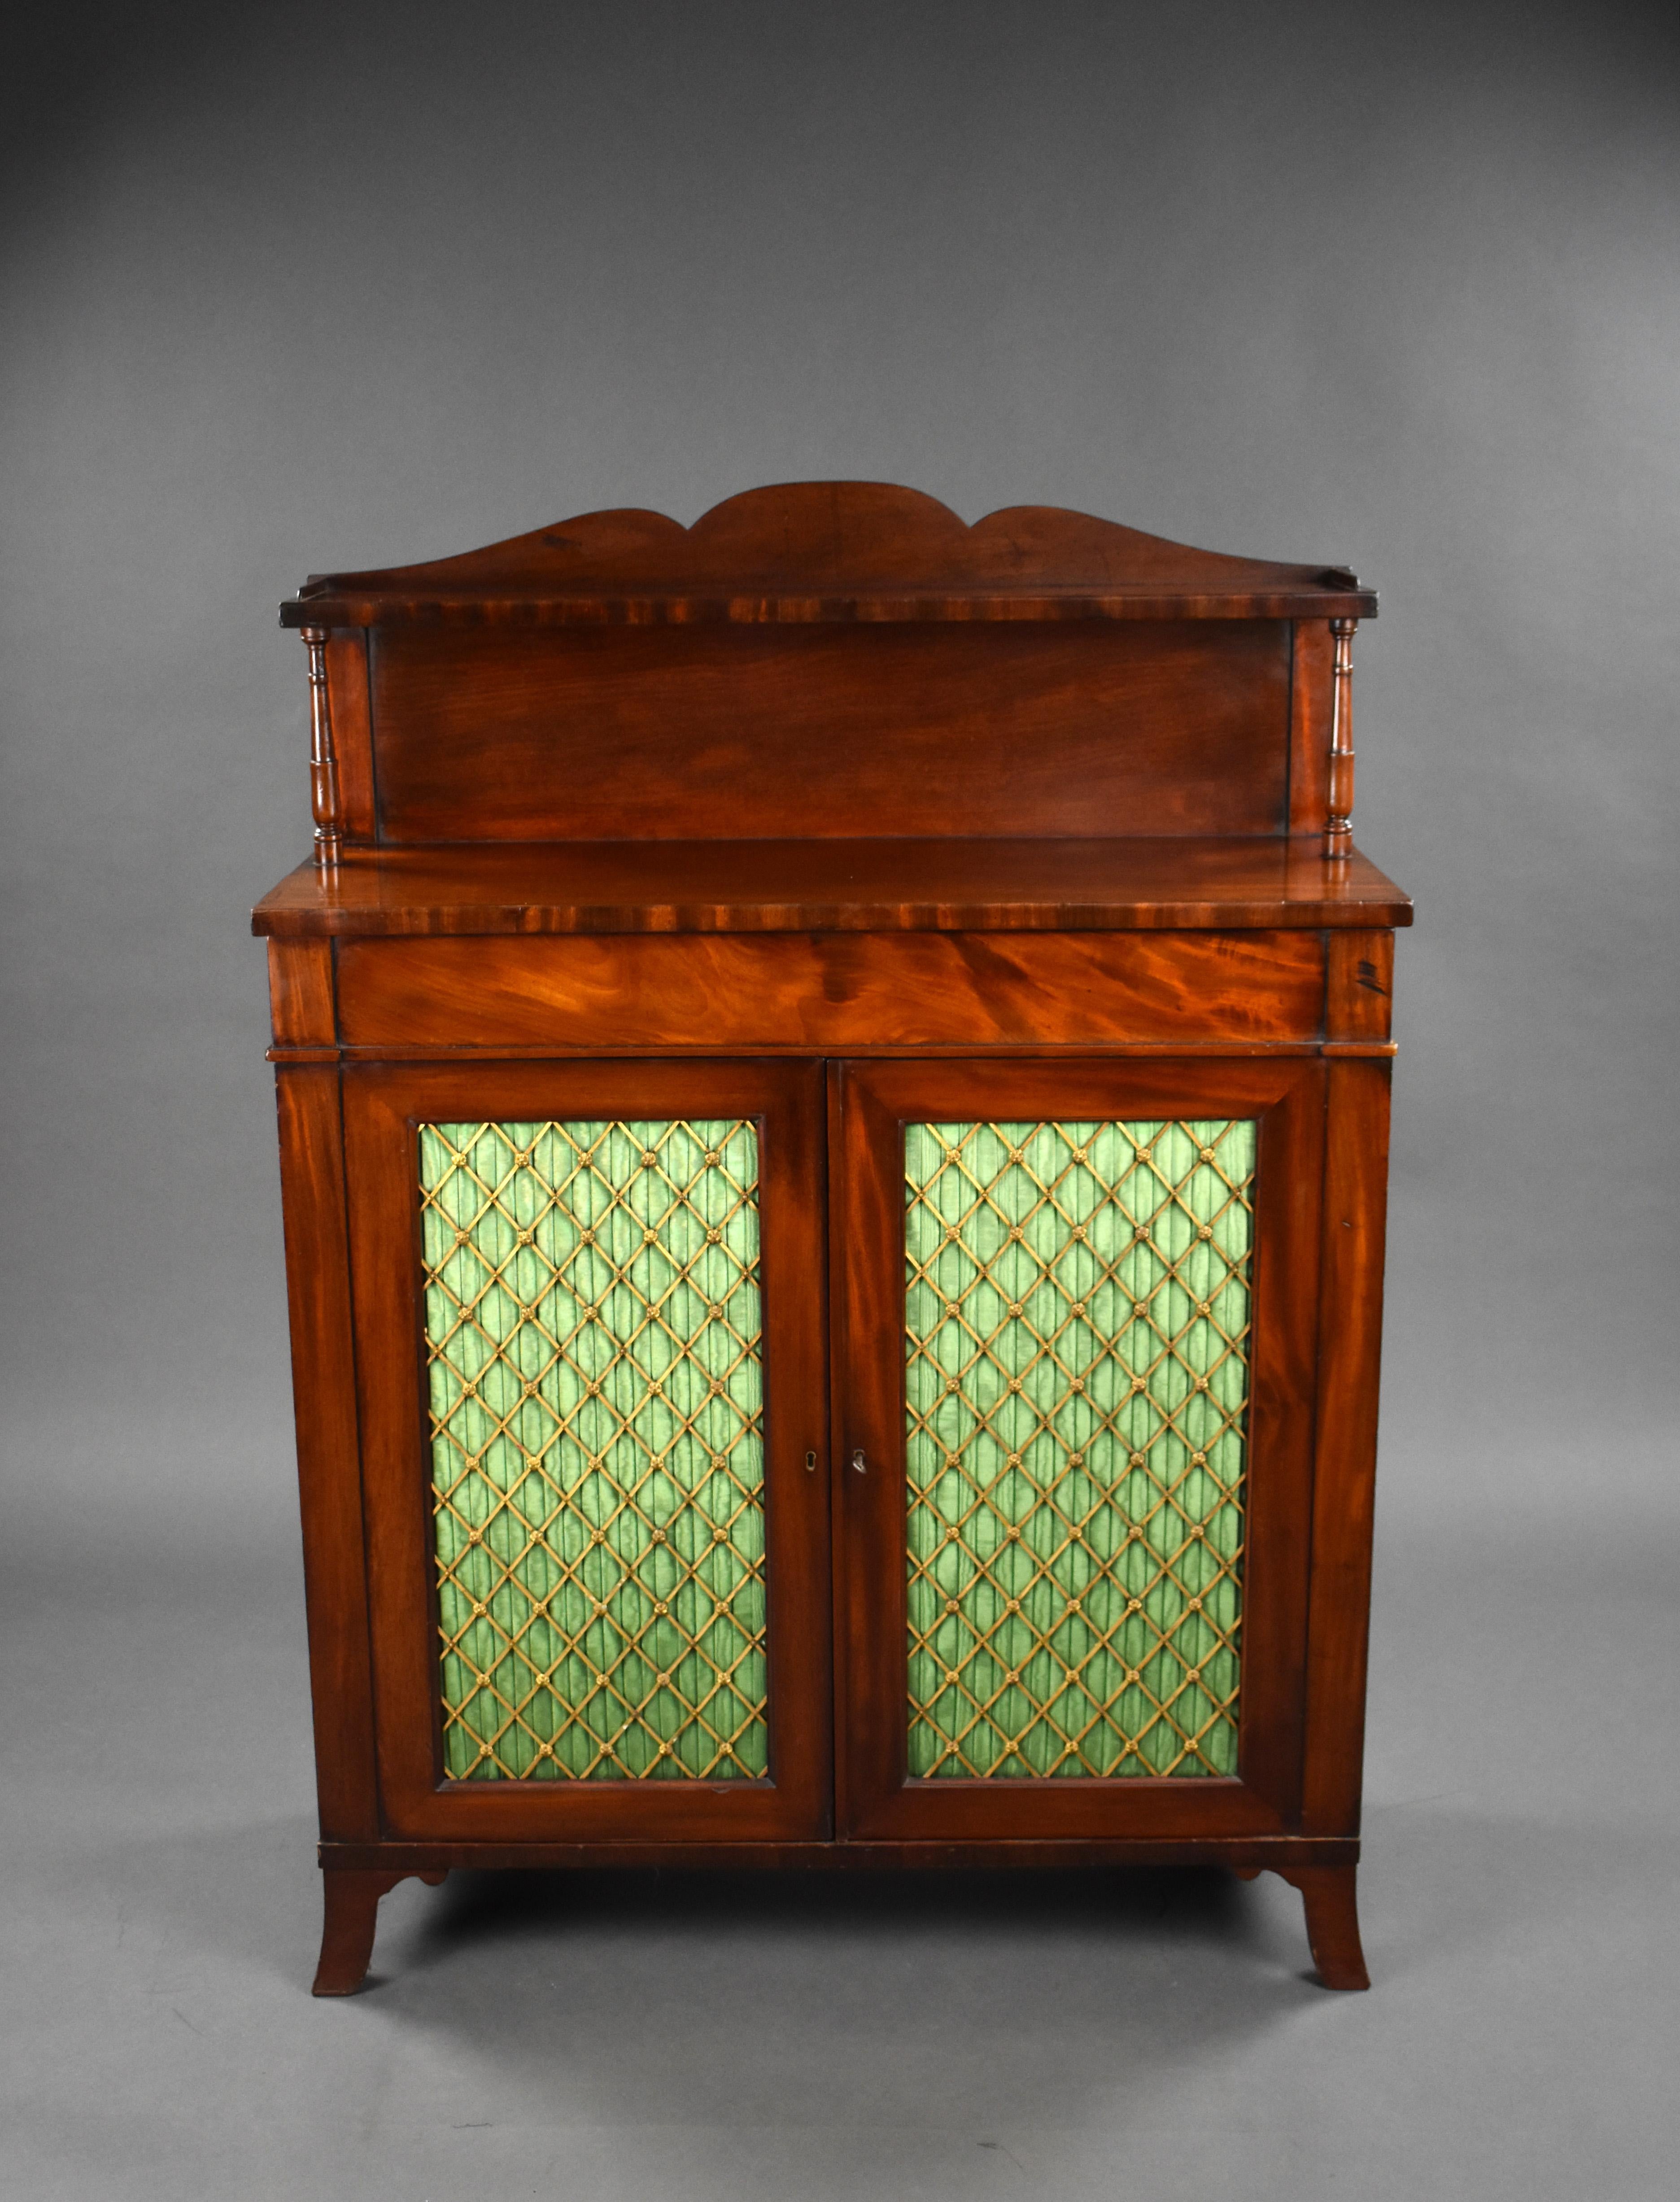 For sale is a good quality Regency mahogany chiffonier, having a shaped back with an open shelf flanked by turned pillars, the projecting base with a single frieze drawer above a pair of rectangular doors with brass grilles lined with pleated silk